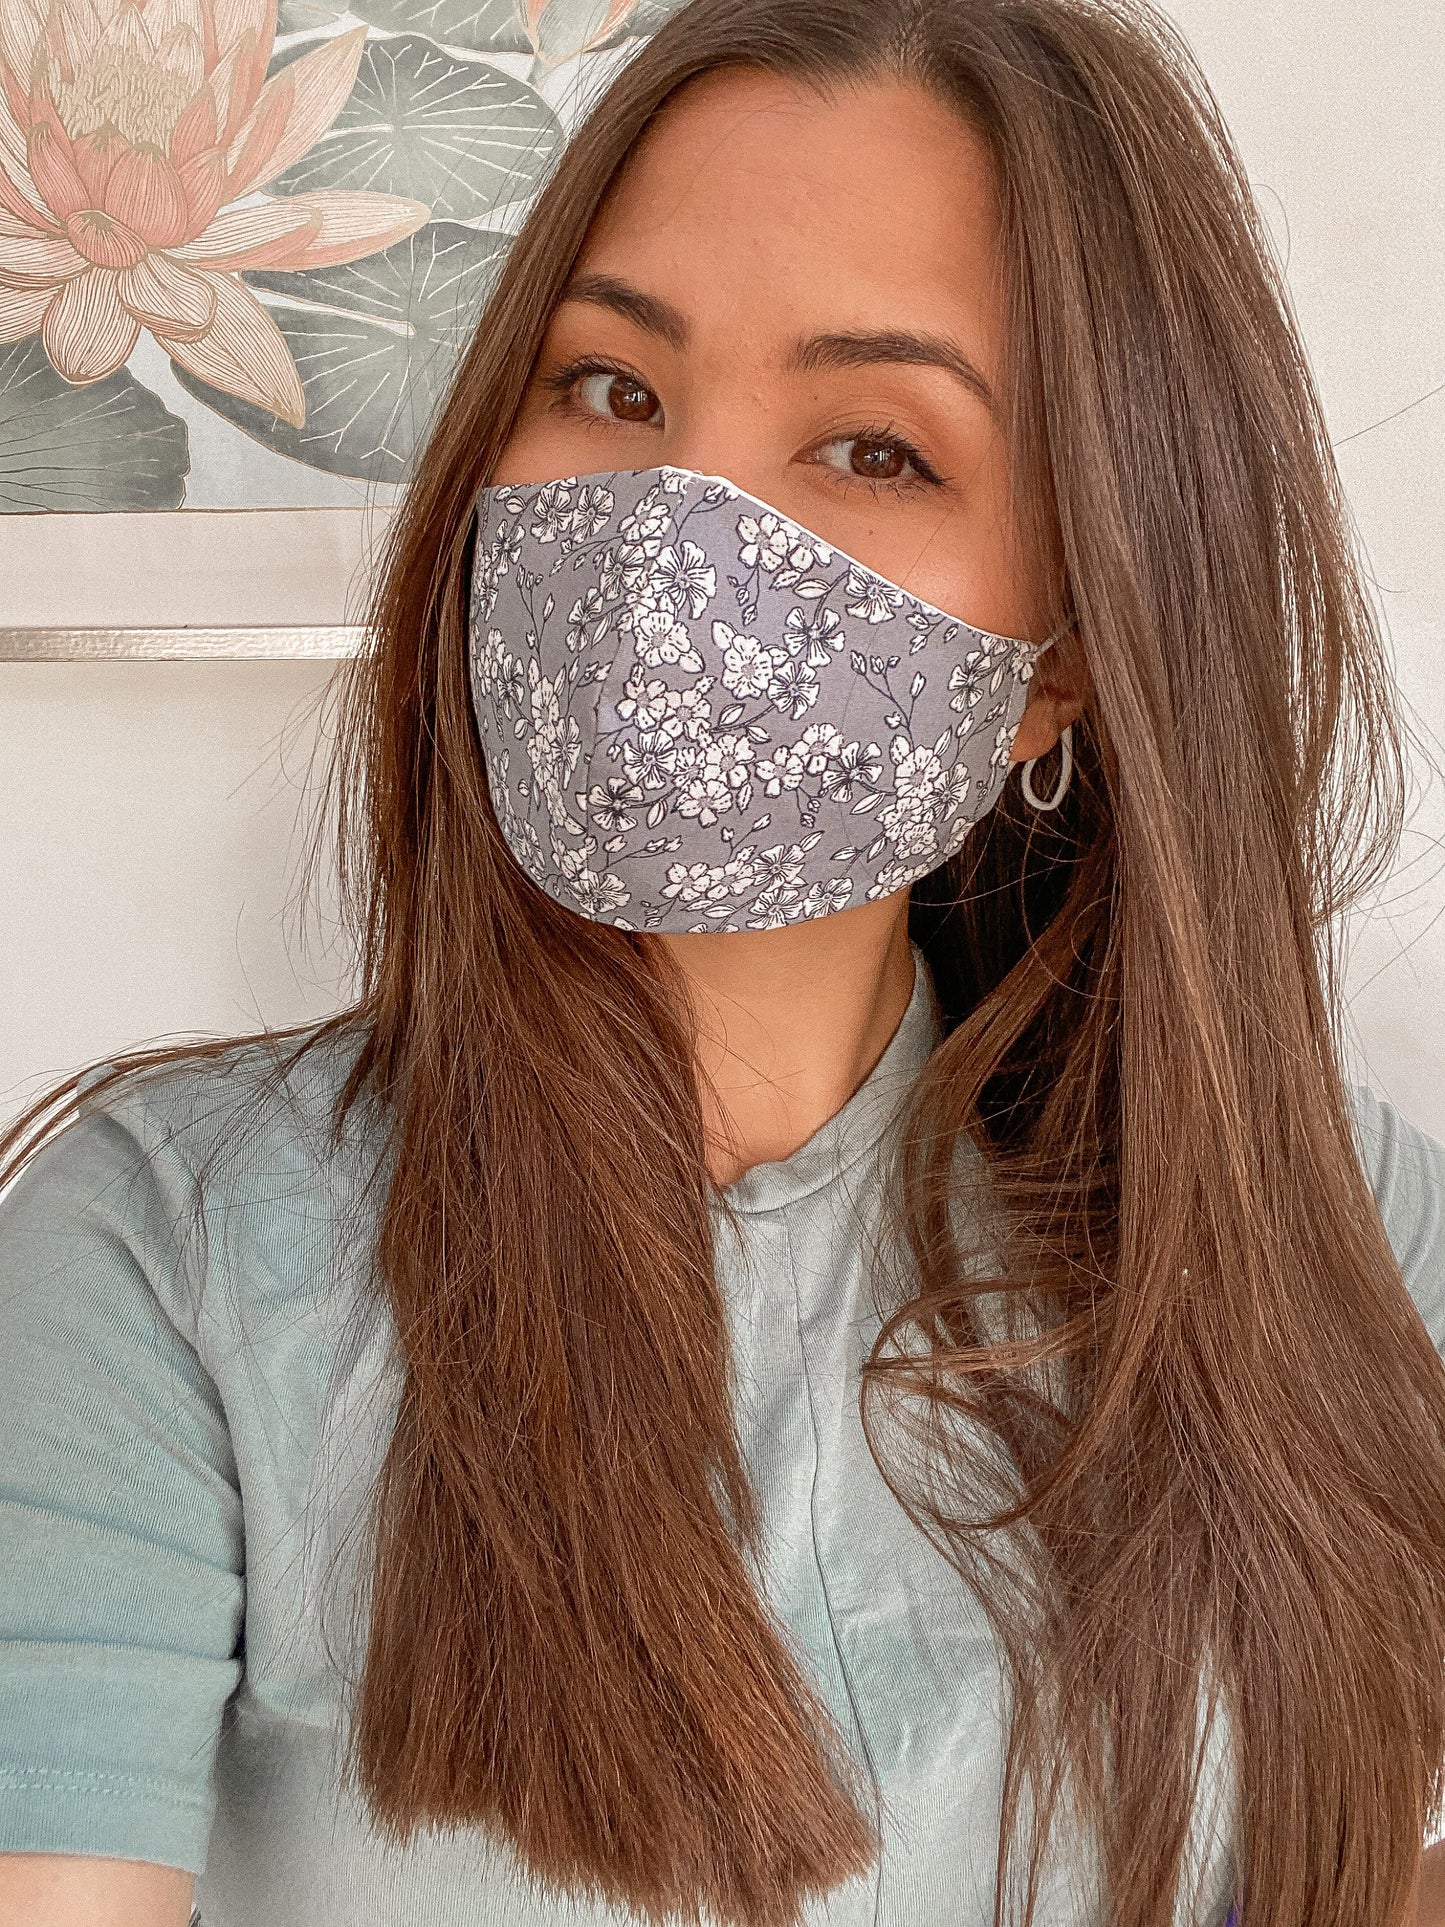 GREY FLORAL REVERSIBLE 2 in 1 Mask Adjustable Super Soft Elastic. Washable Reusable homemade face masks Double layer cotton made in U.K.